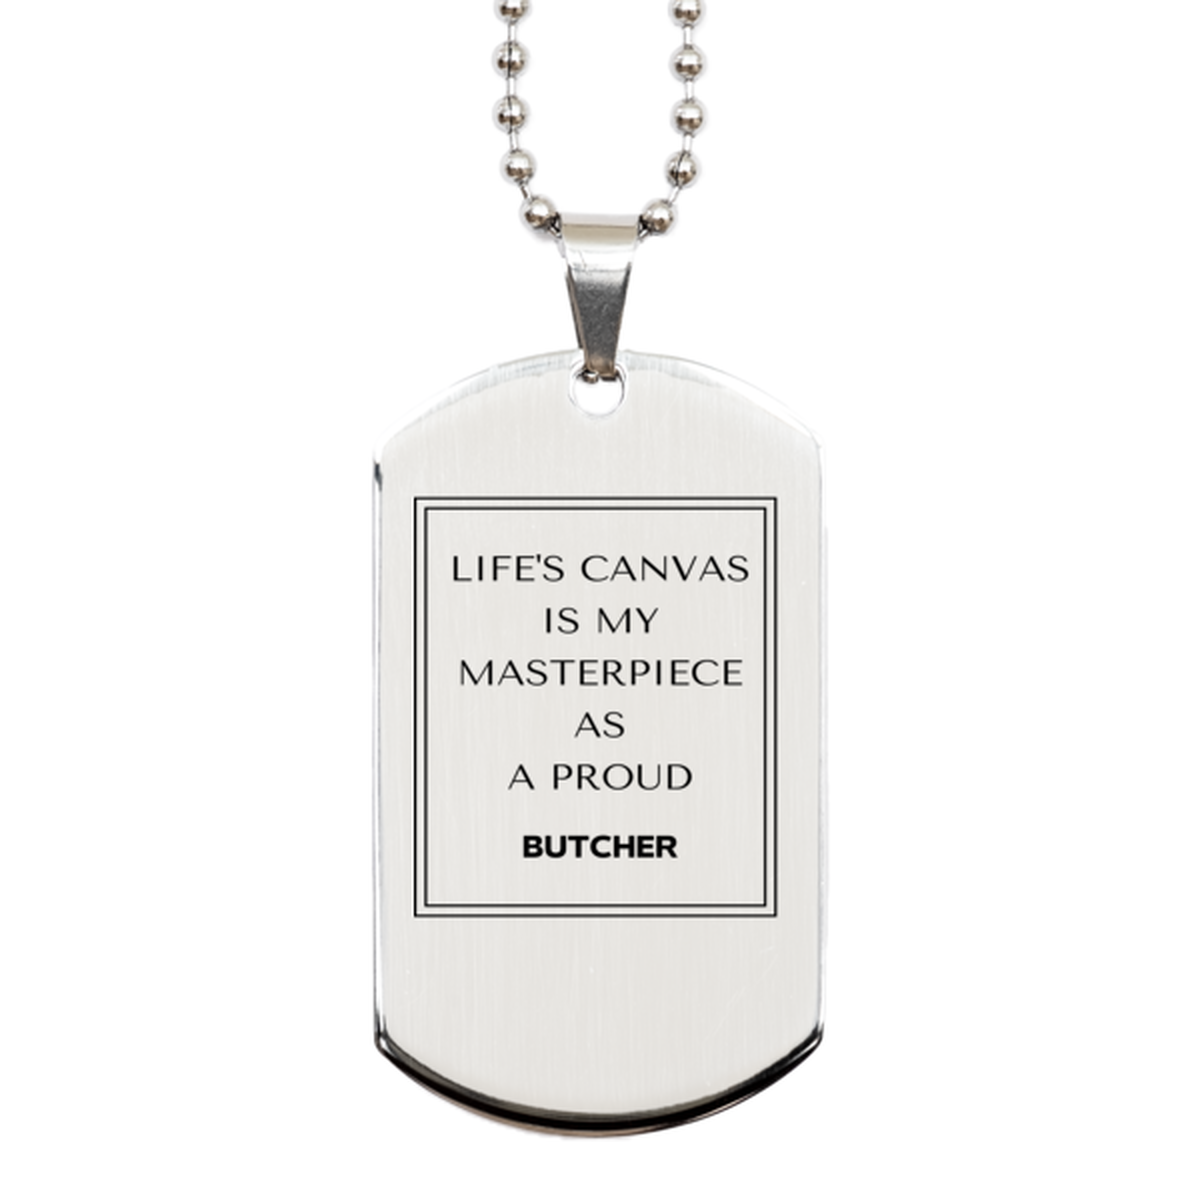 Proud Butcher Gifts, Life's canvas is my masterpiece, Epic Birthday Christmas Unique Silver Dog Tag For Butcher, Coworkers, Men, Women, Friends